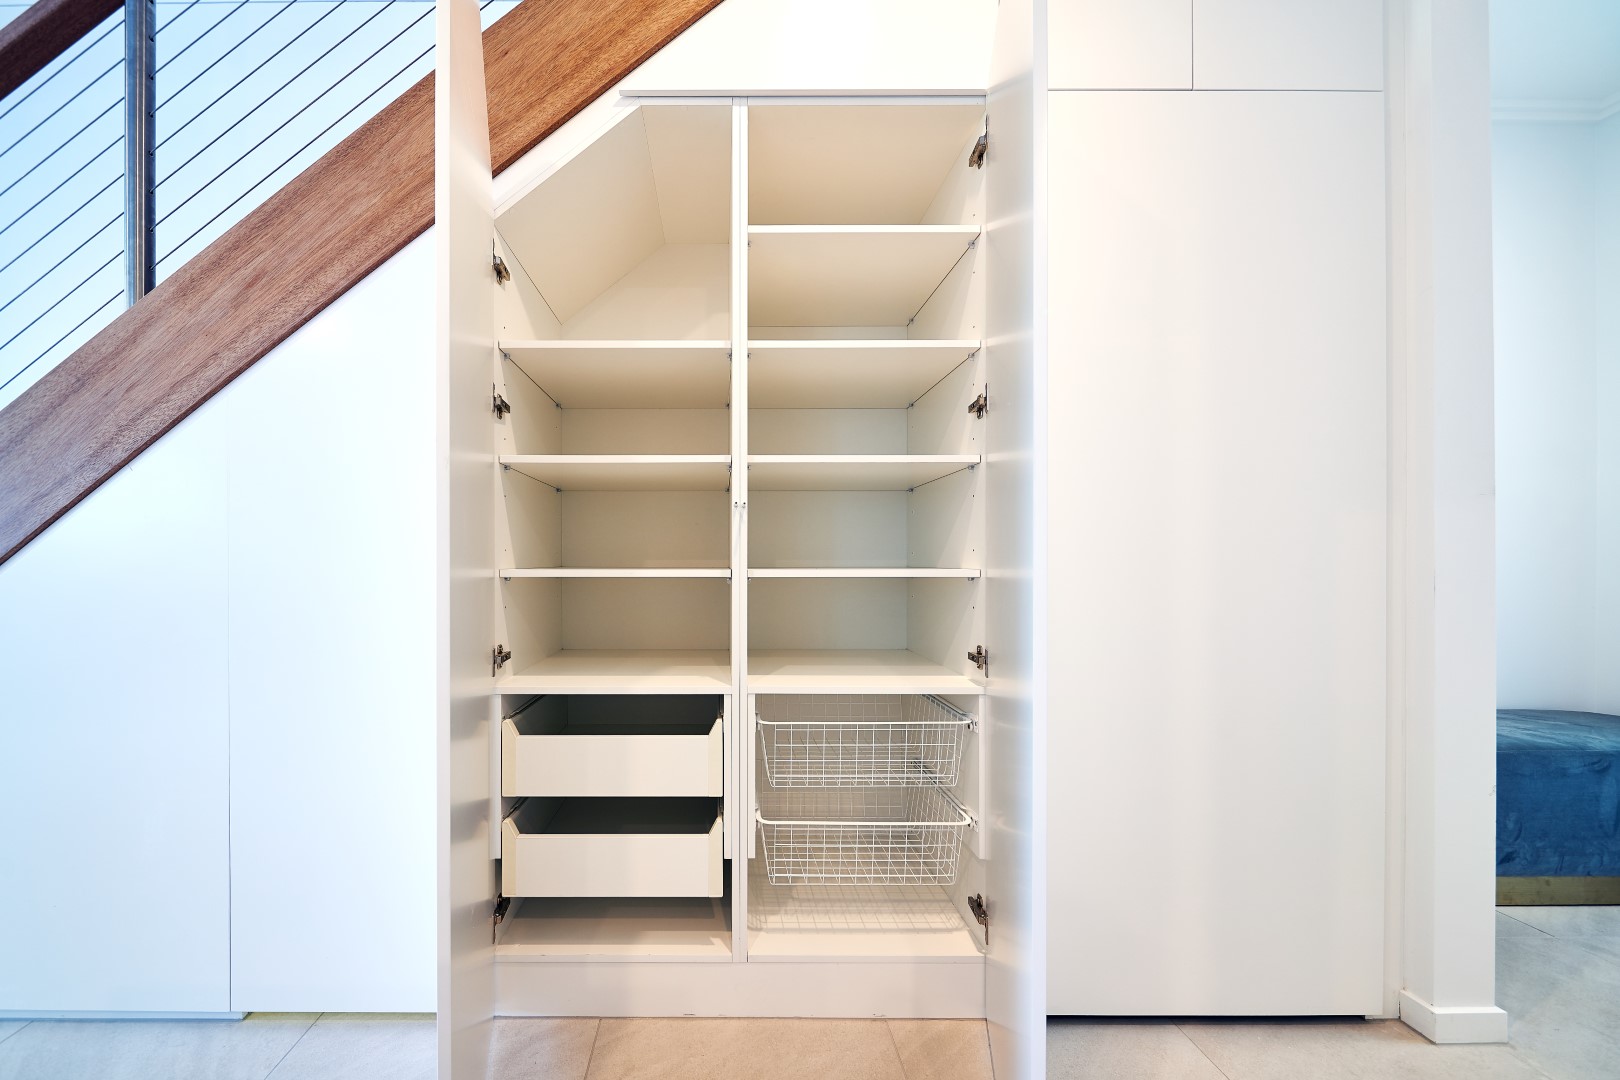 White Hinged Doors (under staircase) with White Board Shelving & Drawers